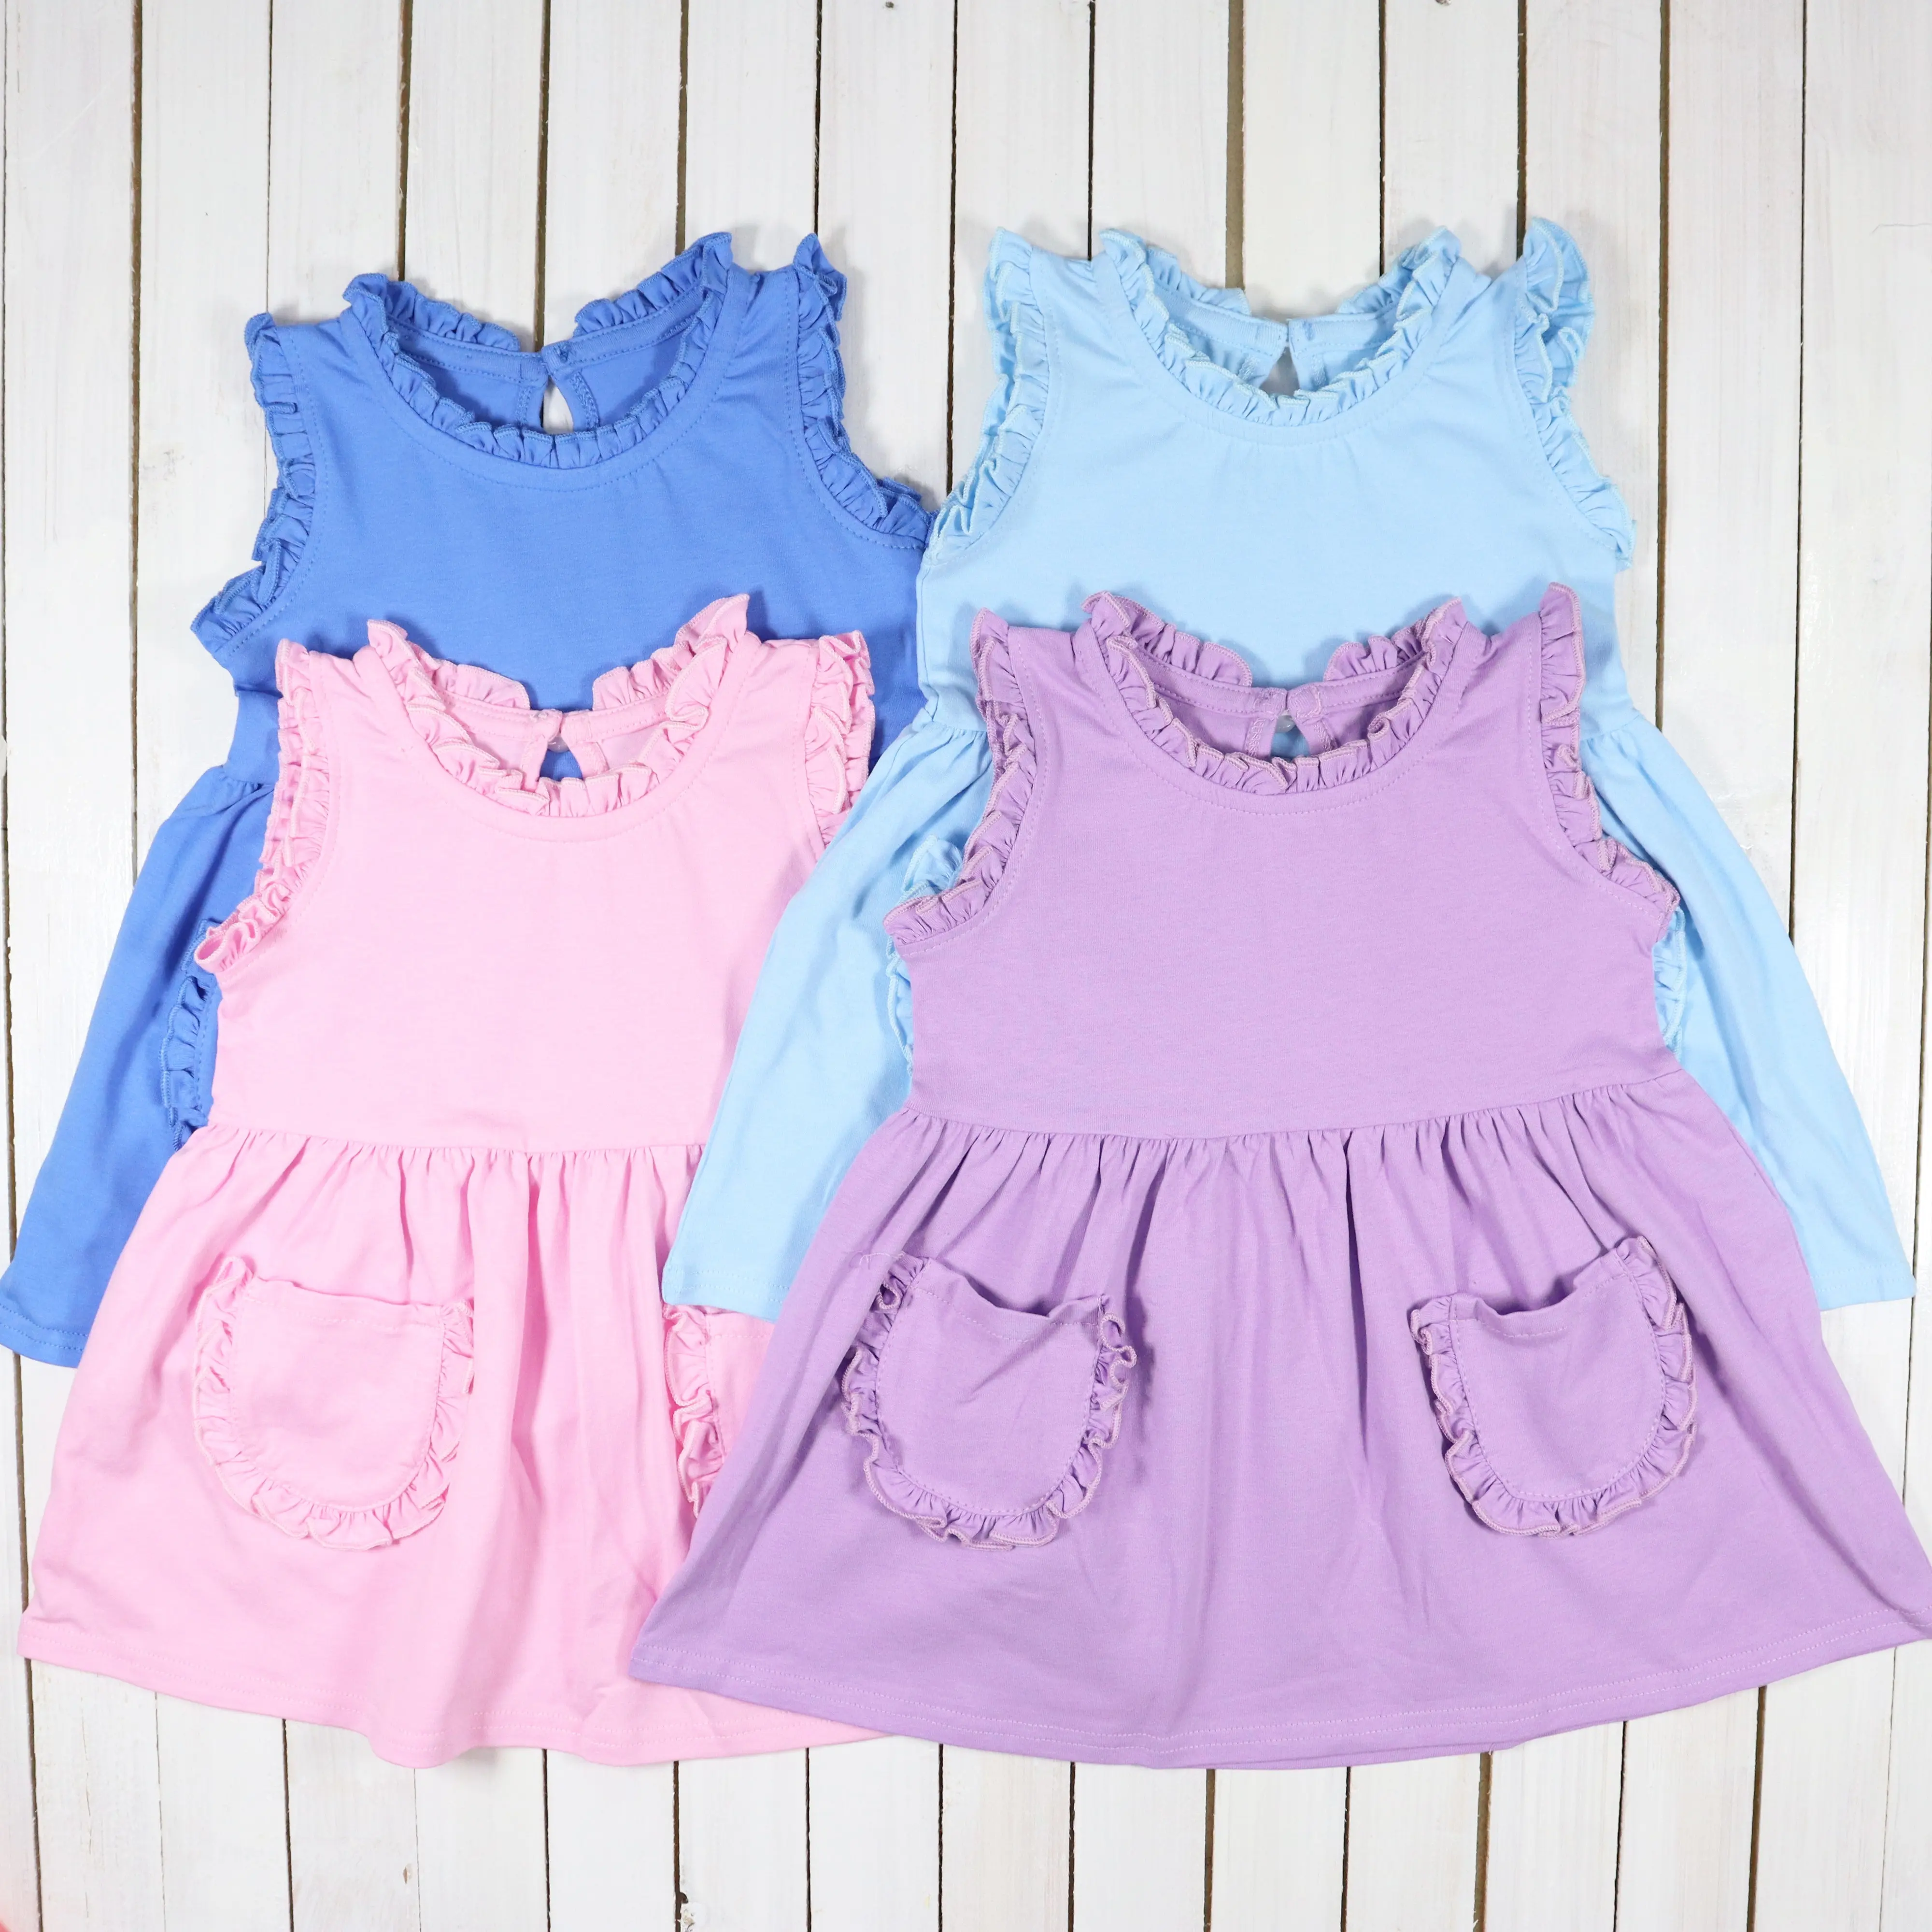 Wholesale Casual Girls Dresses Sleeveless Frocks Solid Cotton Baby Dress For Kids